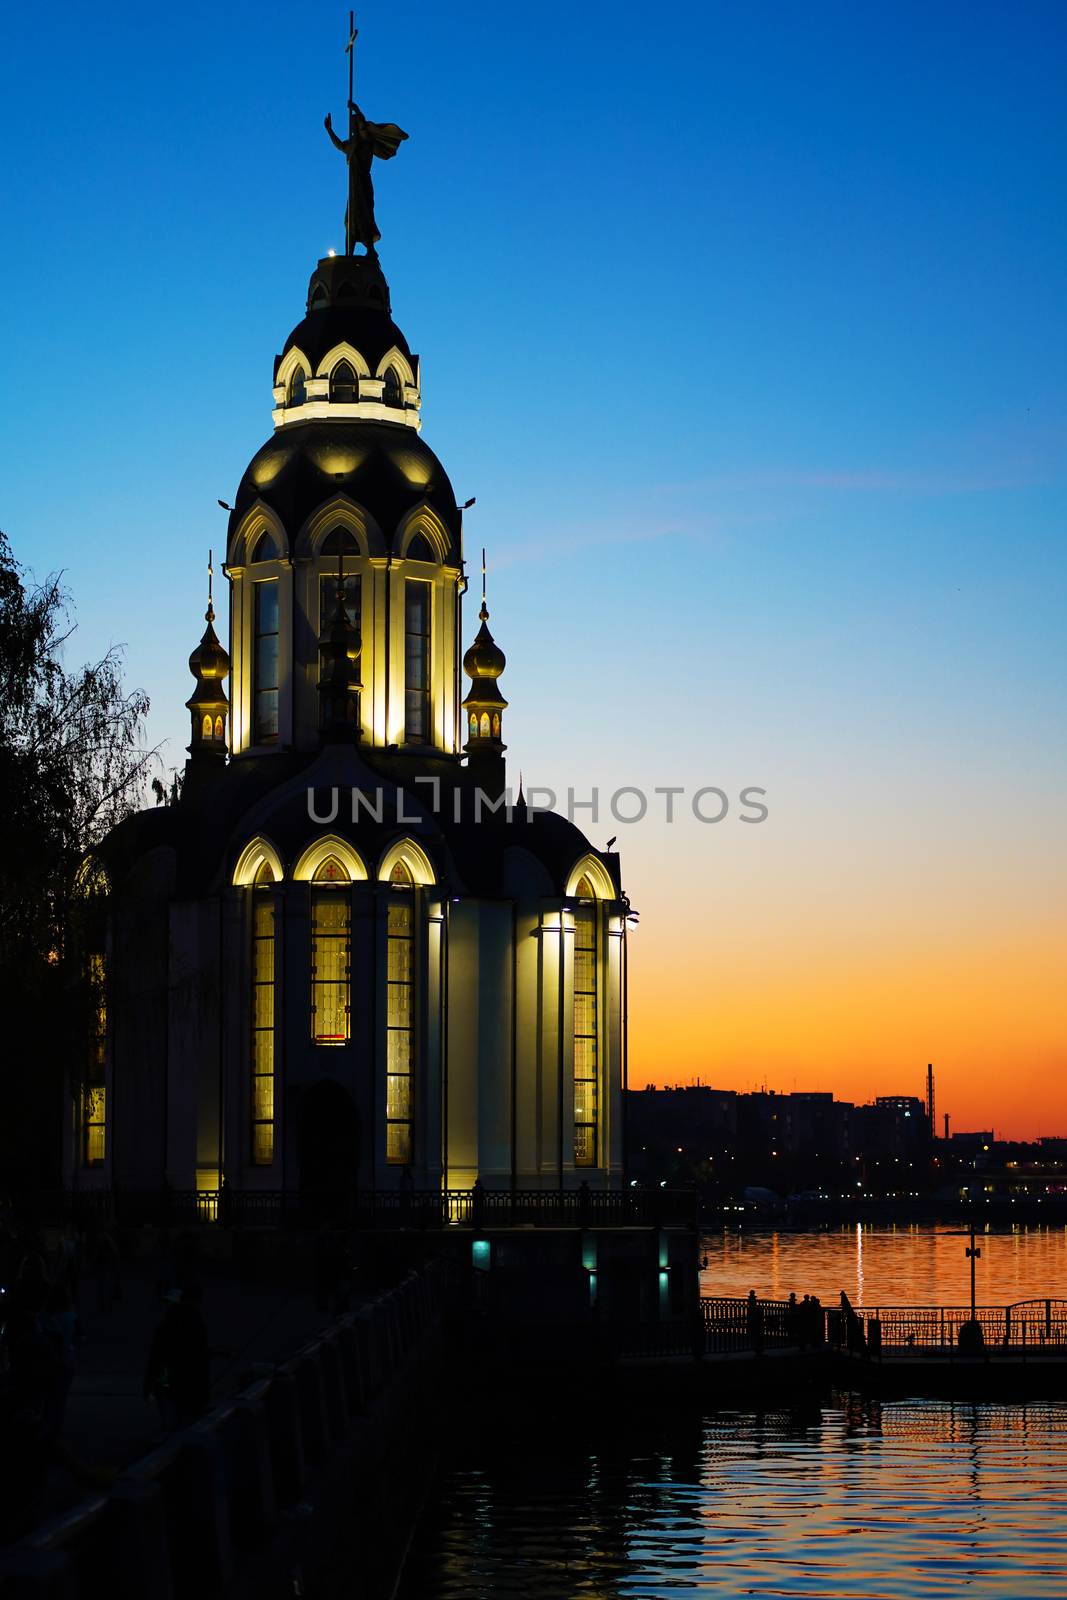 Christian temple by the water at sunset.